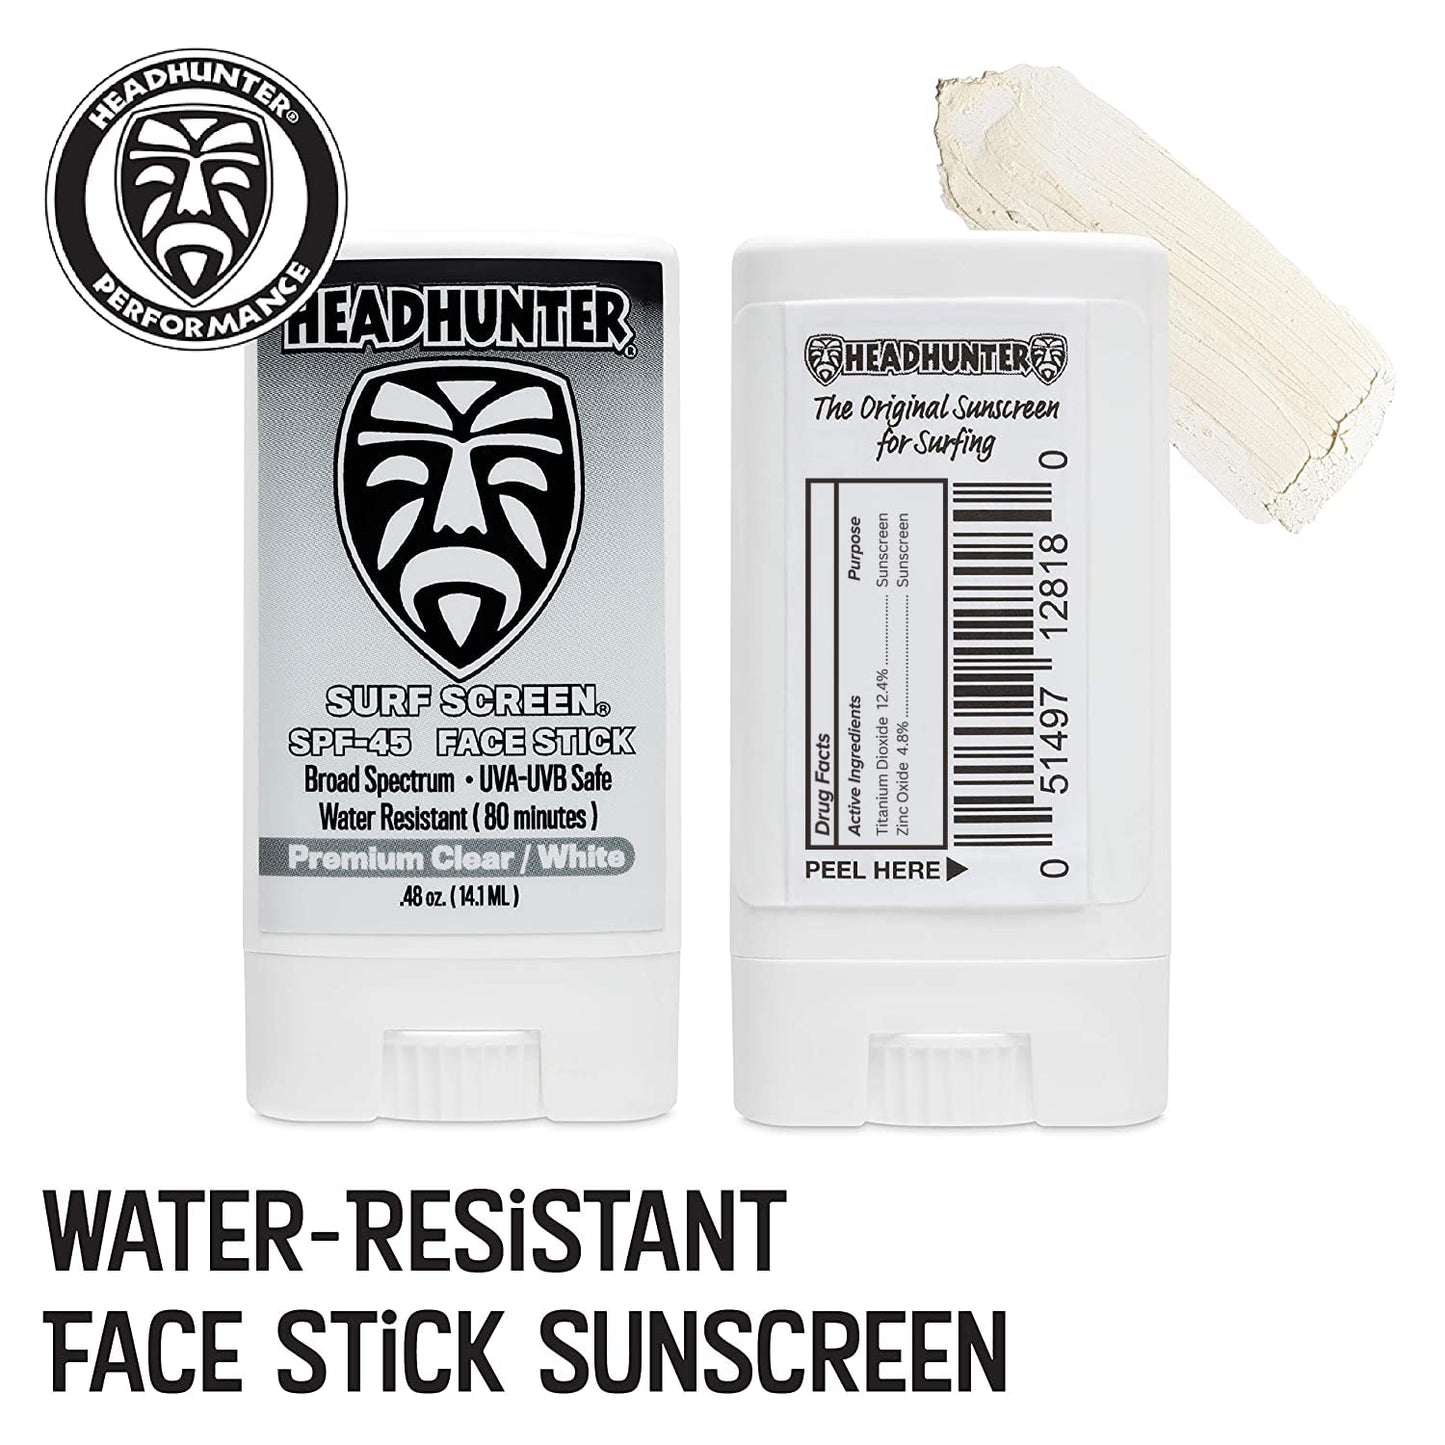 SPF 45 Mineral Sunscreen Face Stick - 3 Pack "Clear/White"